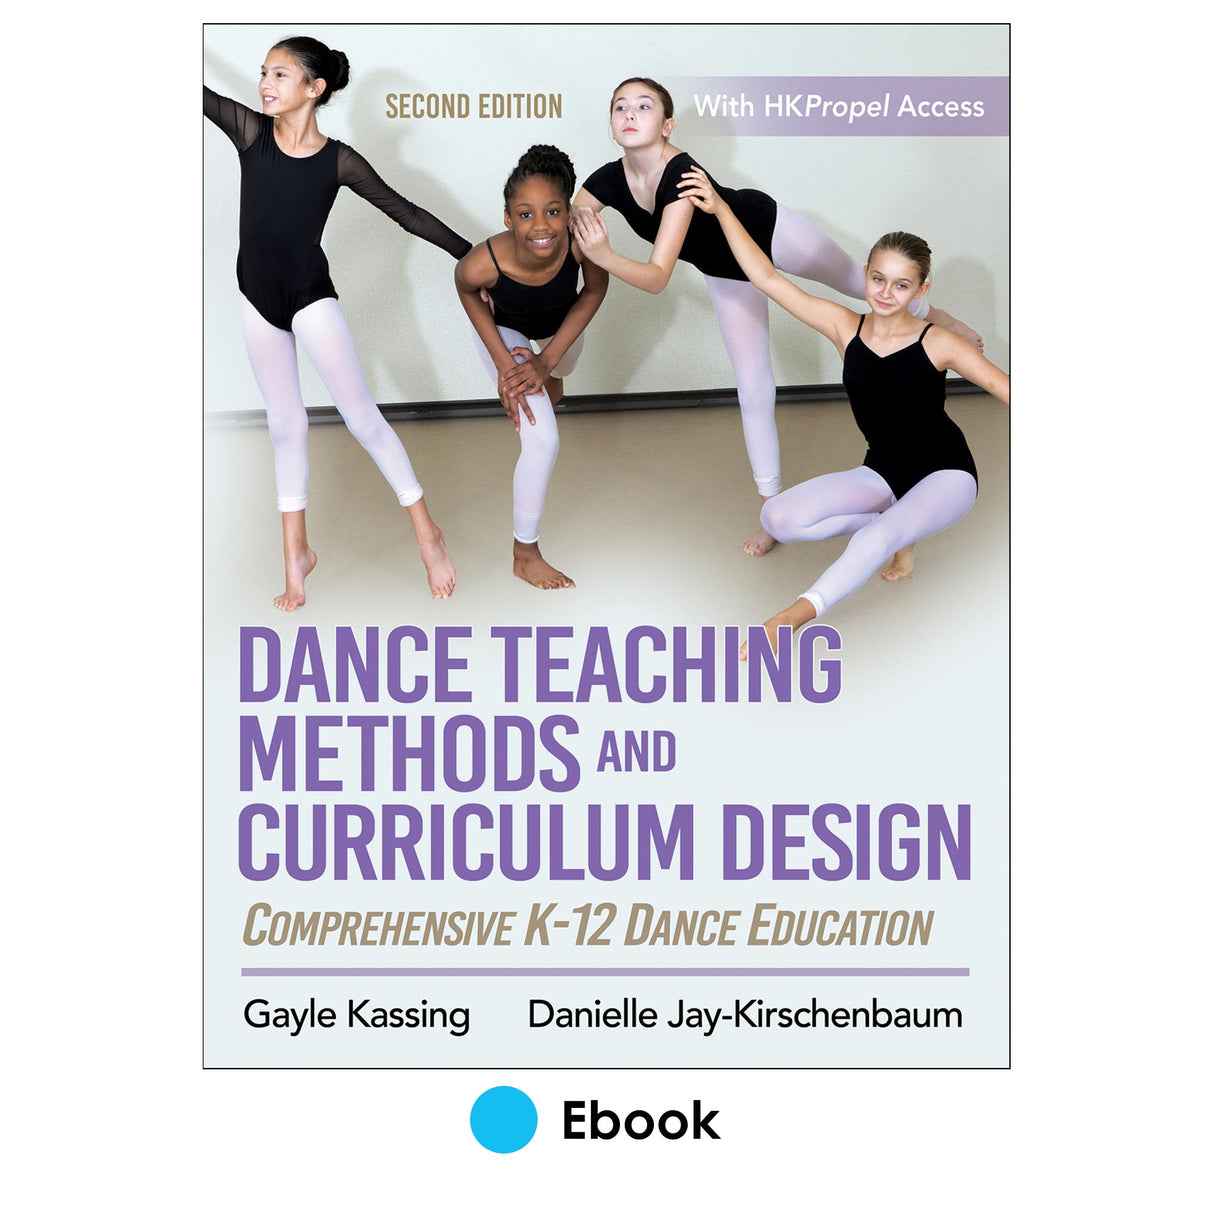 Dance Teaching Methods and Curriculum Design 2nd Edition Ebook With
HKPropel Access